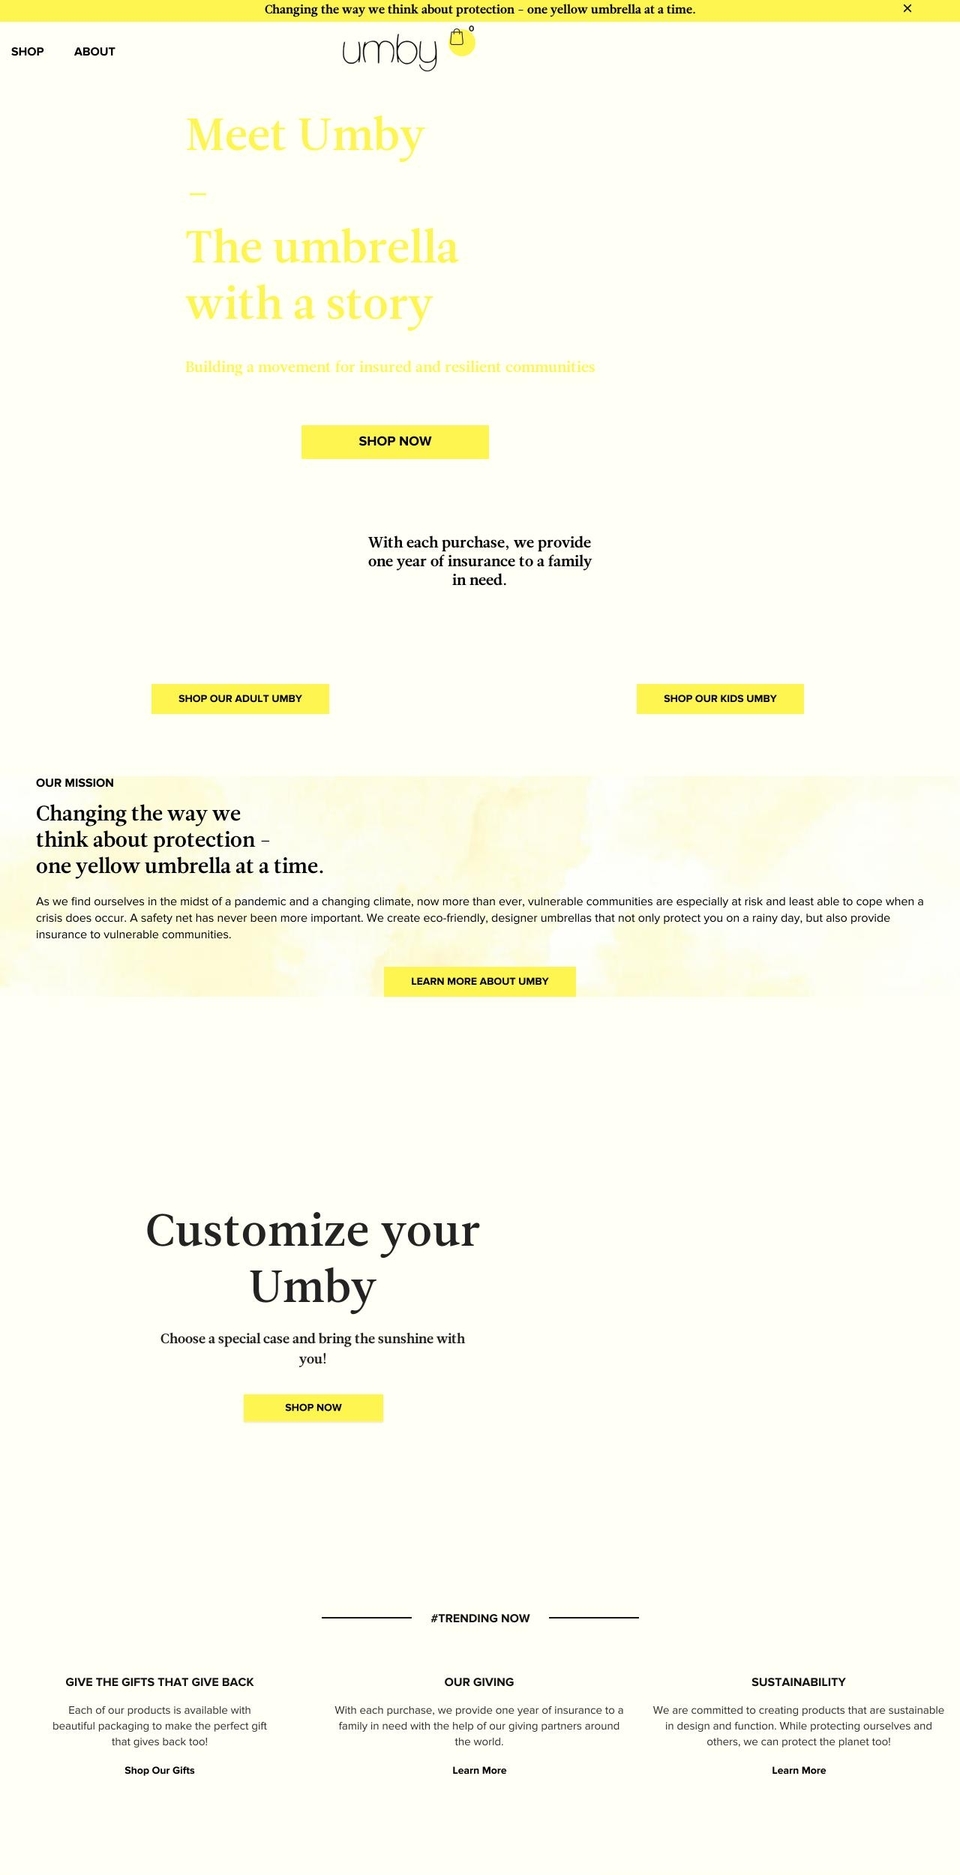 Minion Shopify theme site example umby.co